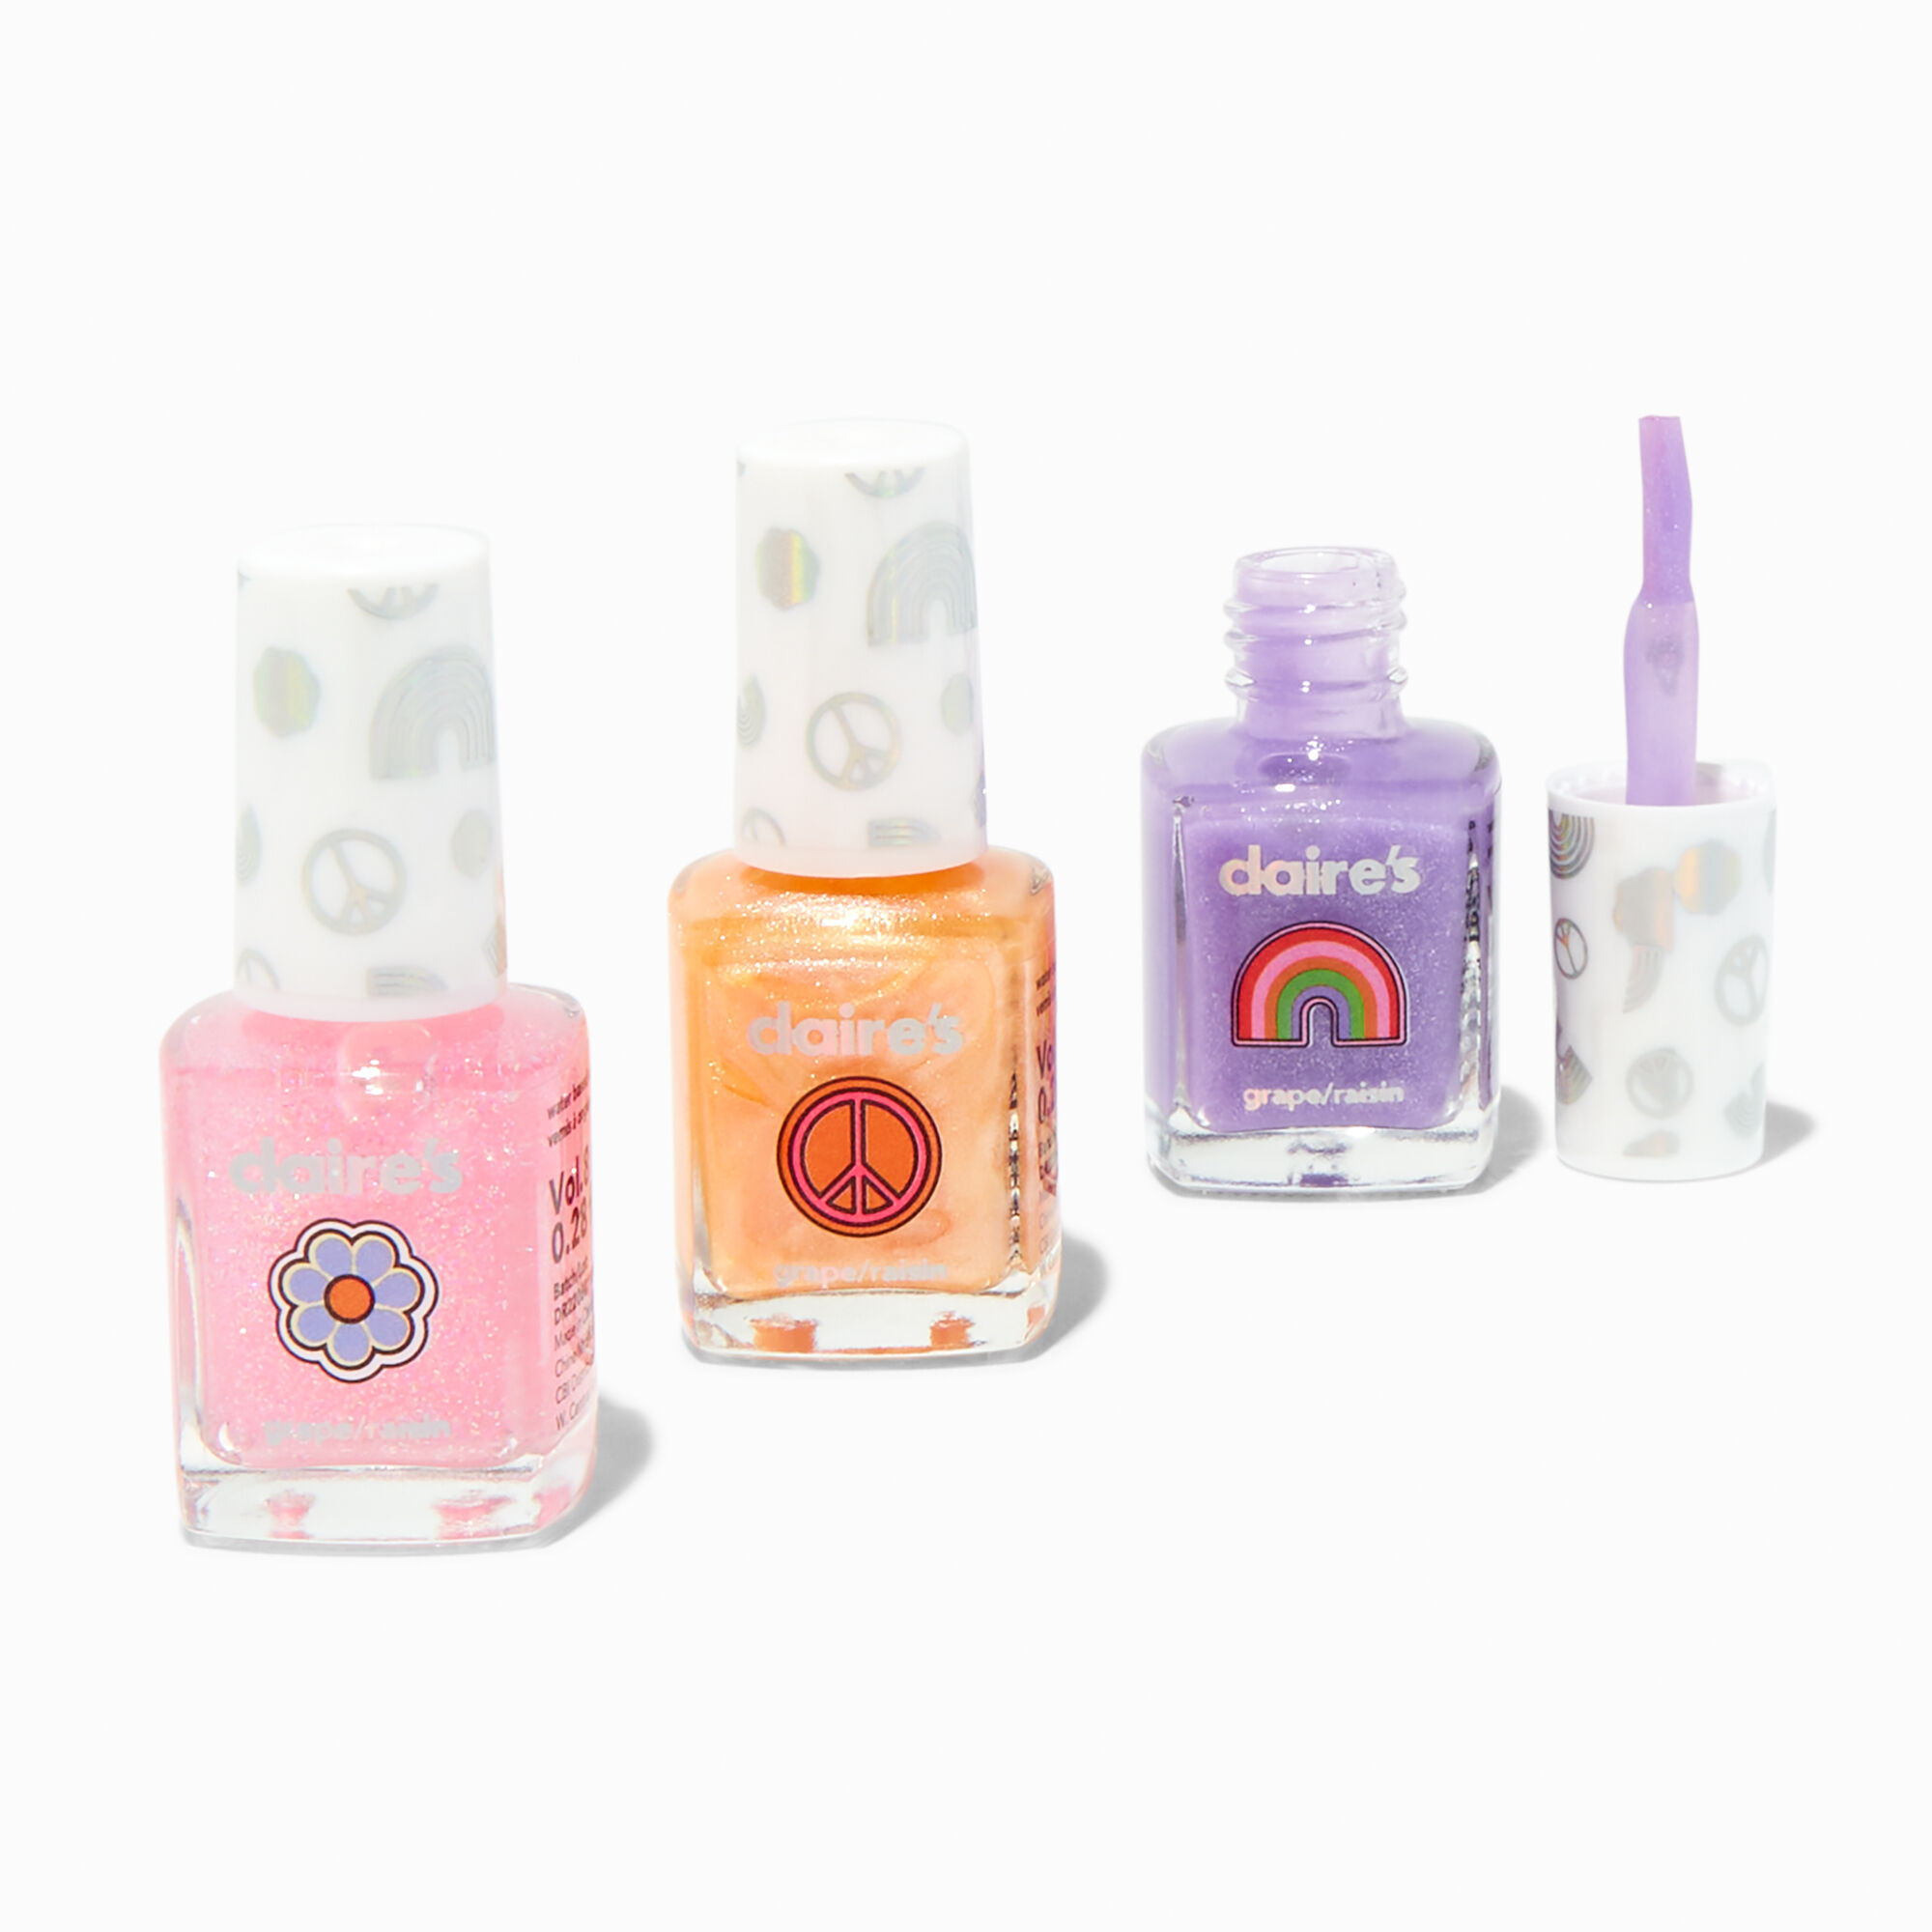 View Claires Groovy Glitter Nail Polish Set 3 Pack information